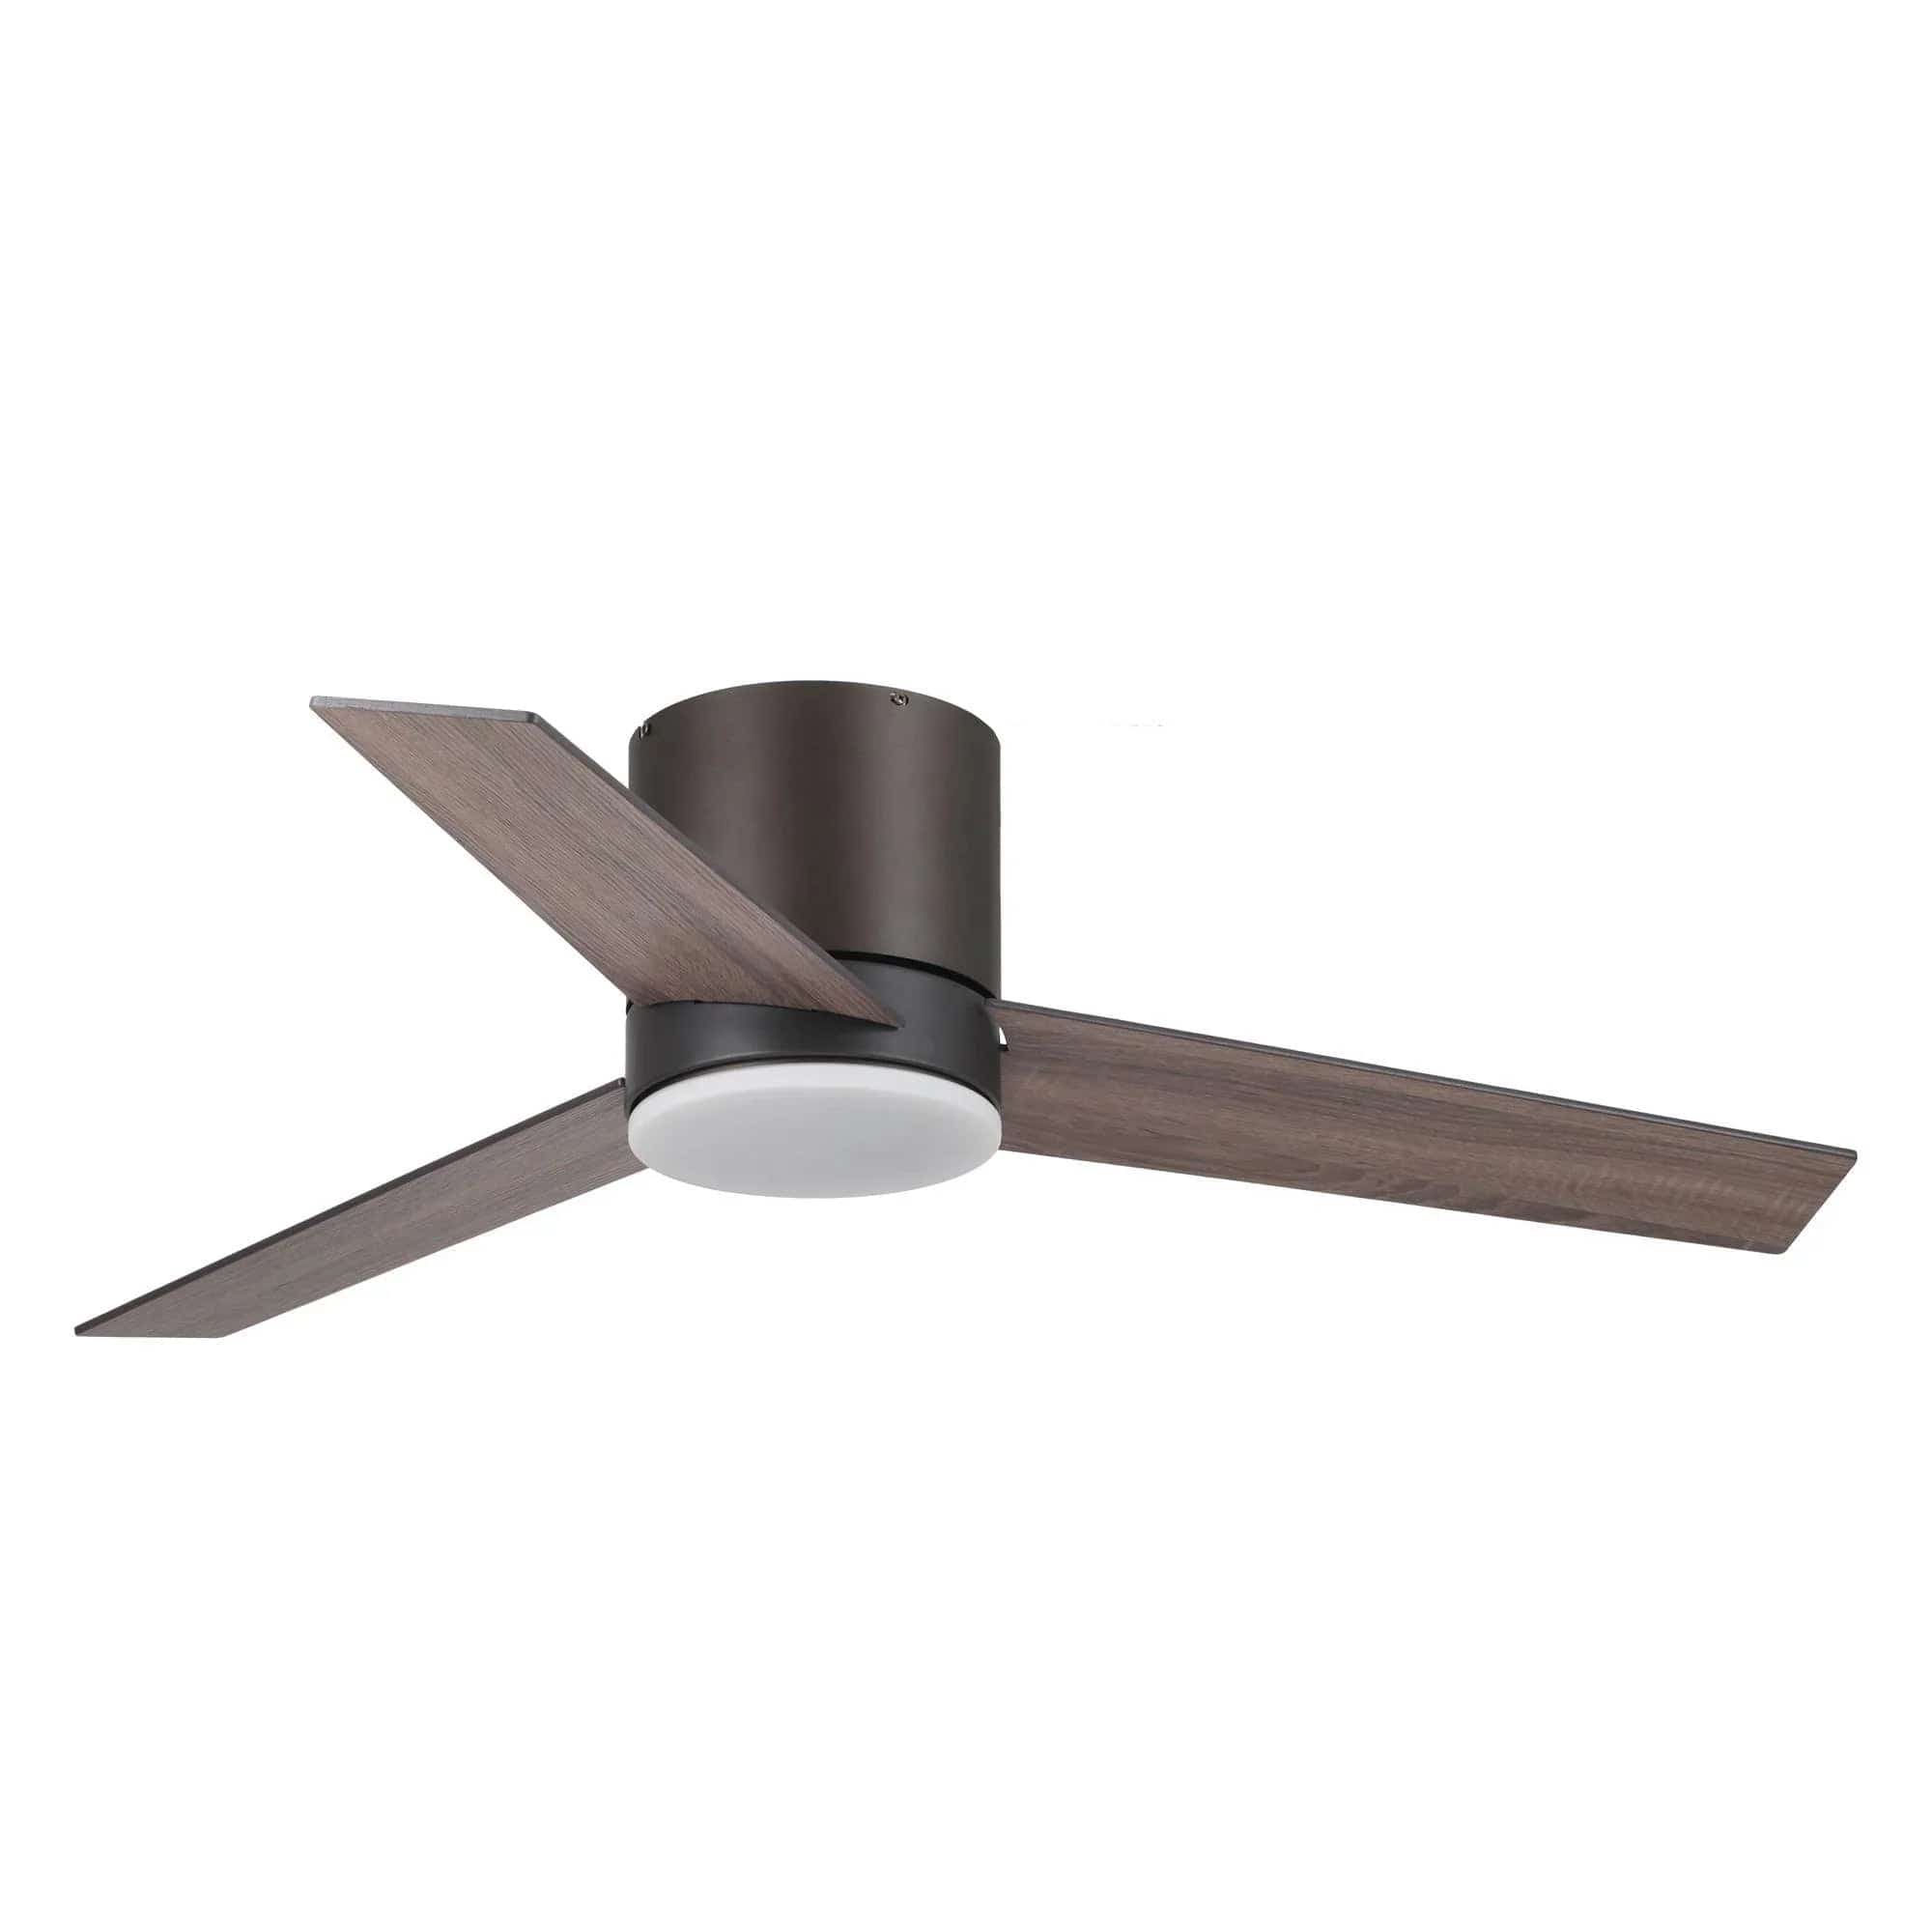 Parrot Uncle Parrot Uncle 48 In. Kielah Modern Ceiling Fan with Lighting and Remote Control Ceiling Fan F6298110V